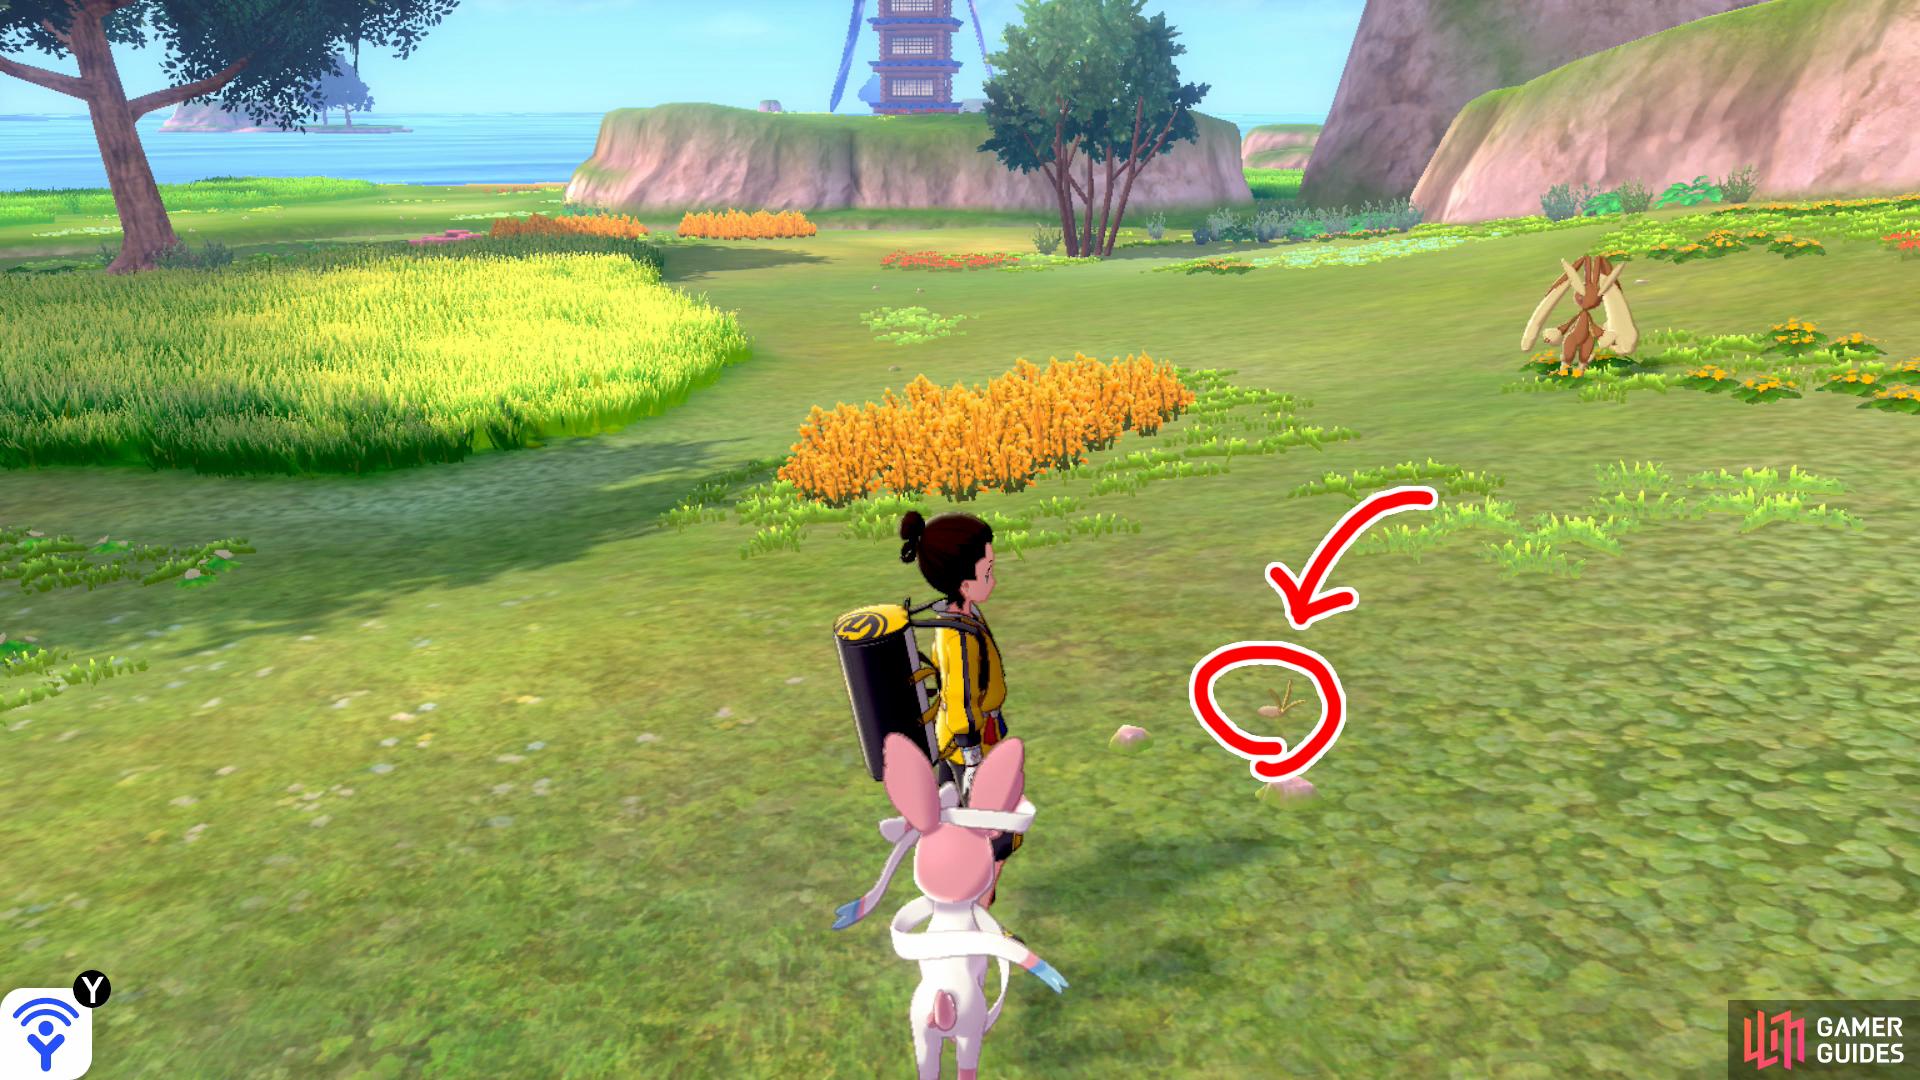 11/20: From Diglett 10, face the tower in the distance. There's some tall yellow grass on the left and another bunch on the right, further ahead. Go up to the second tall yellow grass and search the pebbles a few paces before it.